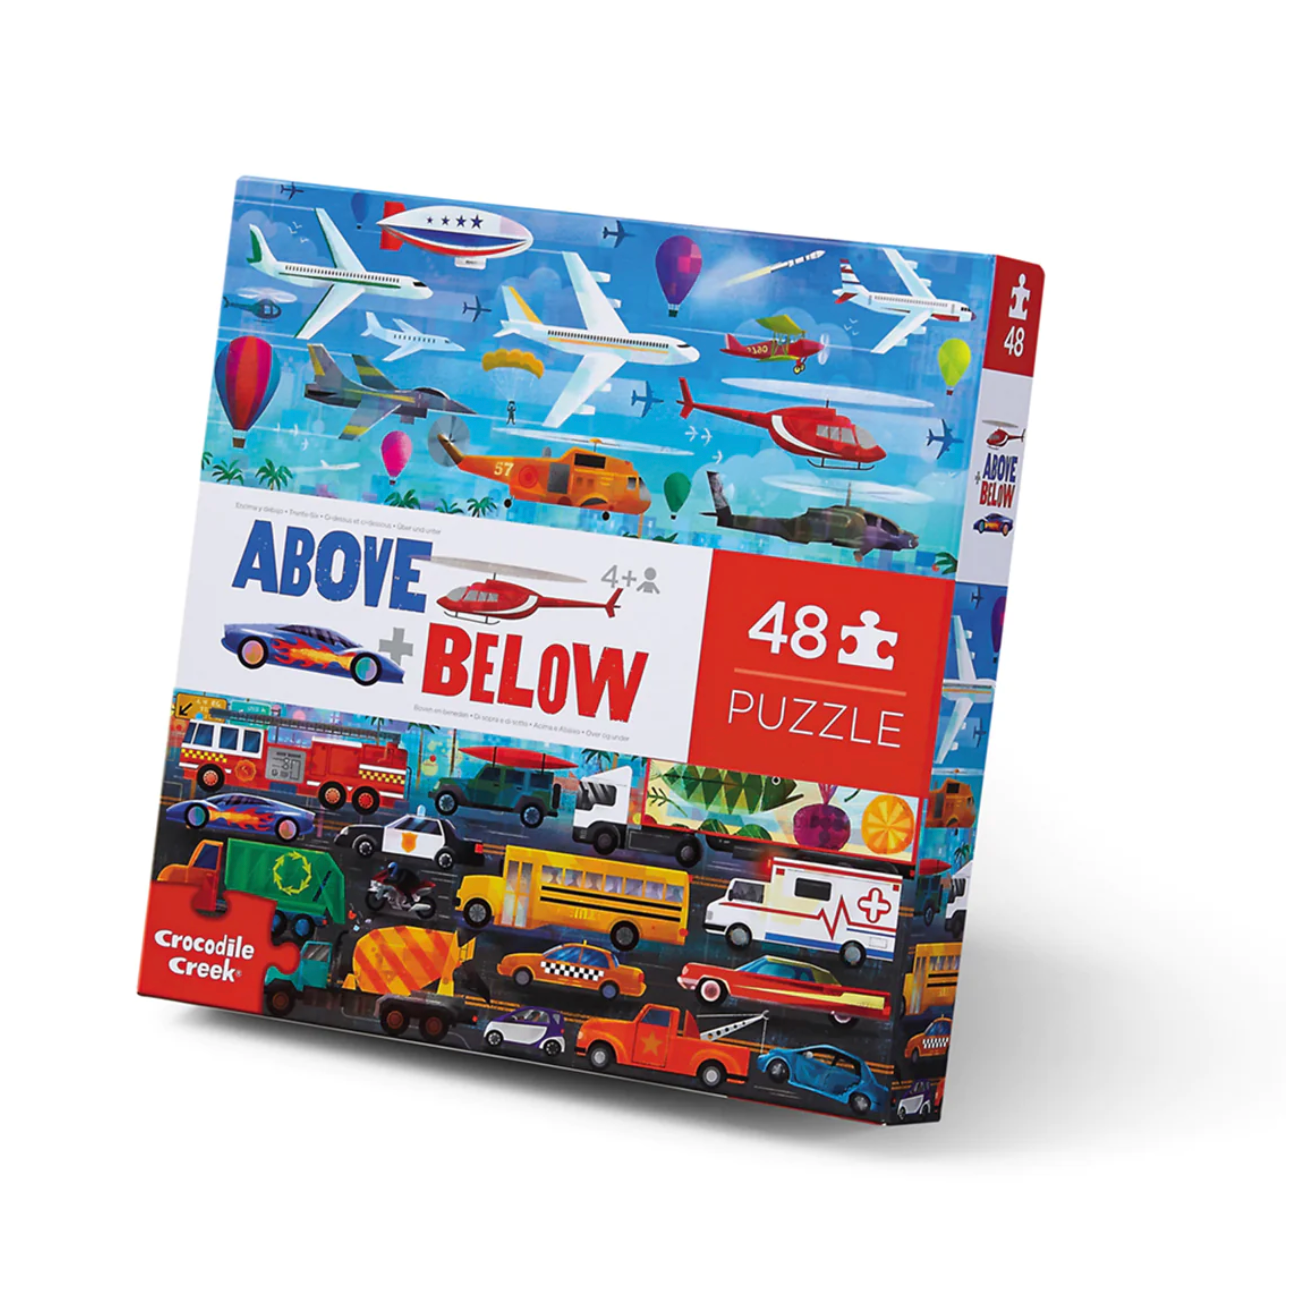 Things that Go Above &amp; Below 48pc Puzzle